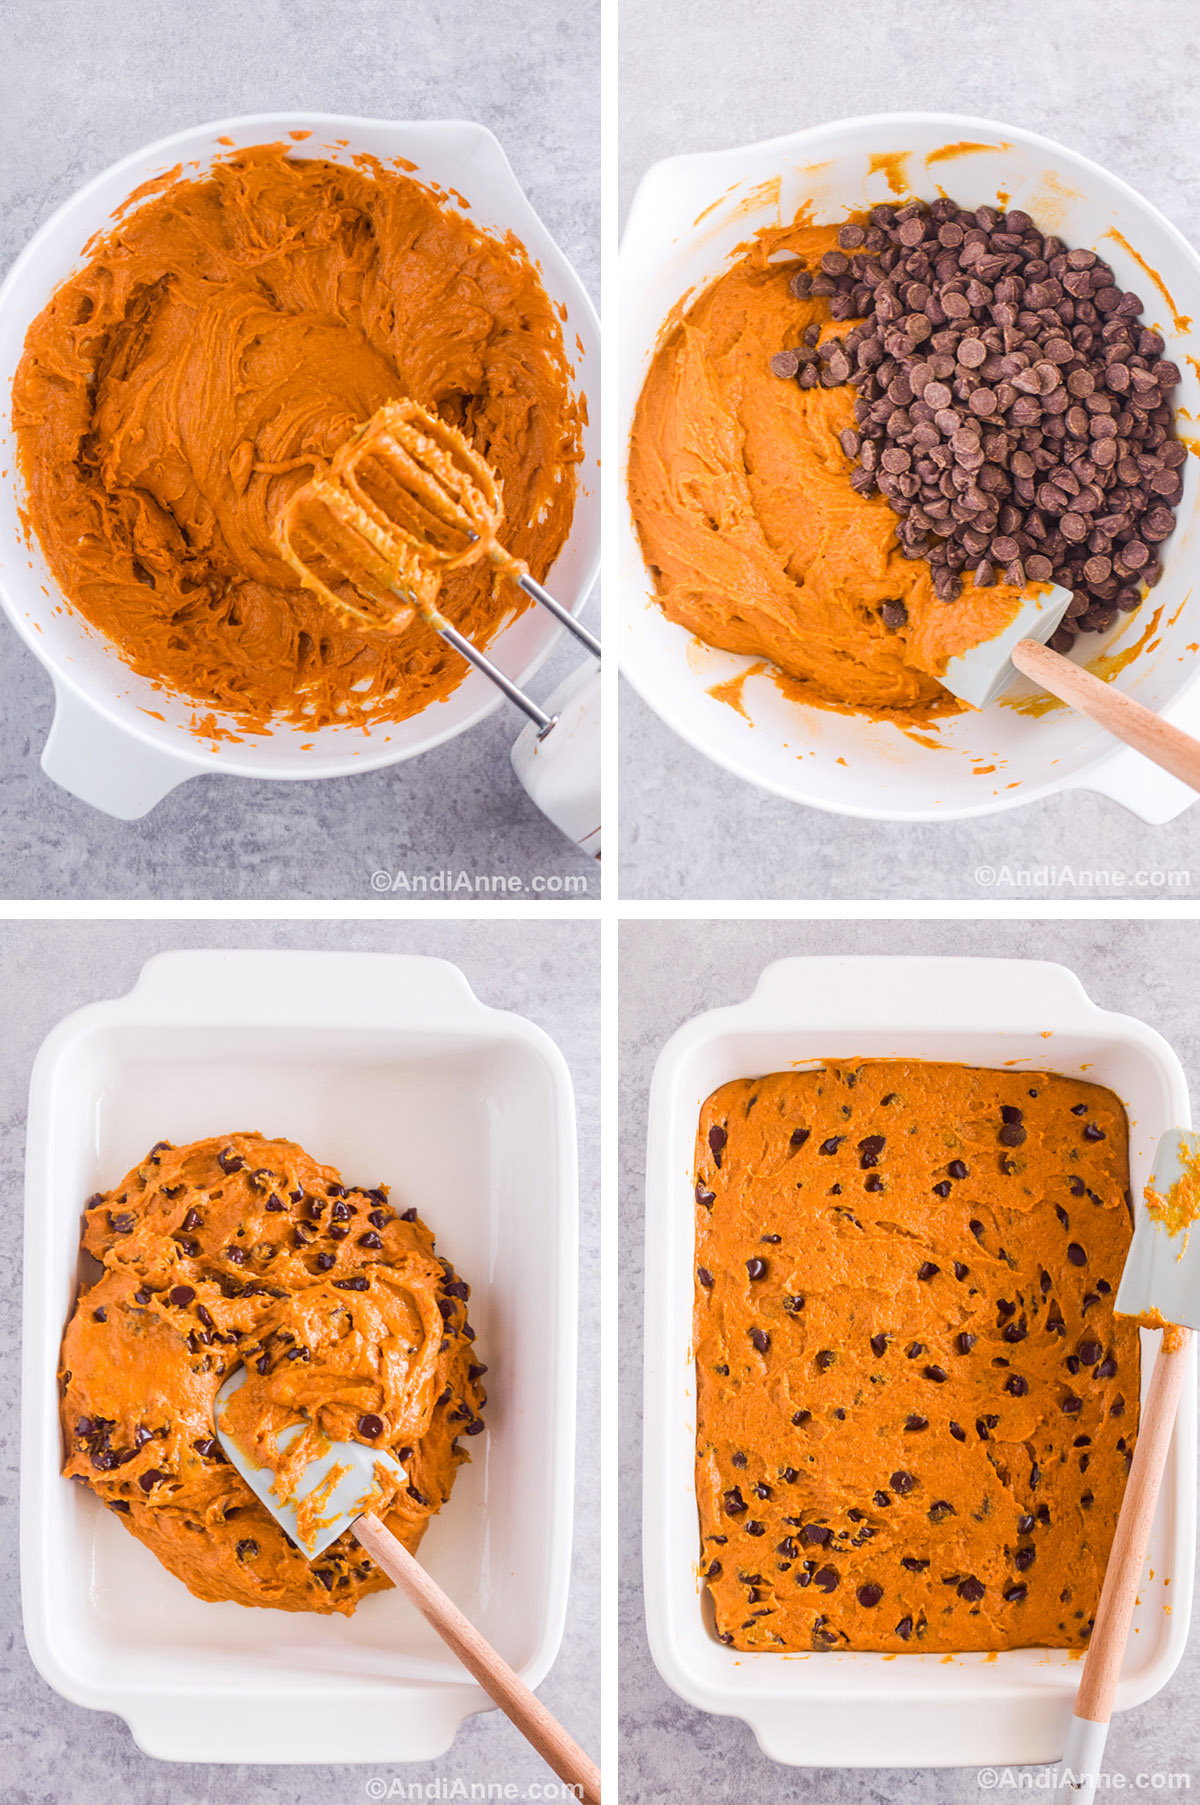 Four images together showing steps to make the recipe. First is white bowl with orange batter and a hand mixer. Second is orange batter in bowl with chocolate chips dumped on top. Third is orange batter with chocolate chips dumped into a rectangle white baking dish with a spatula. Fourth is cake raw batter smoothed into white baking dish.